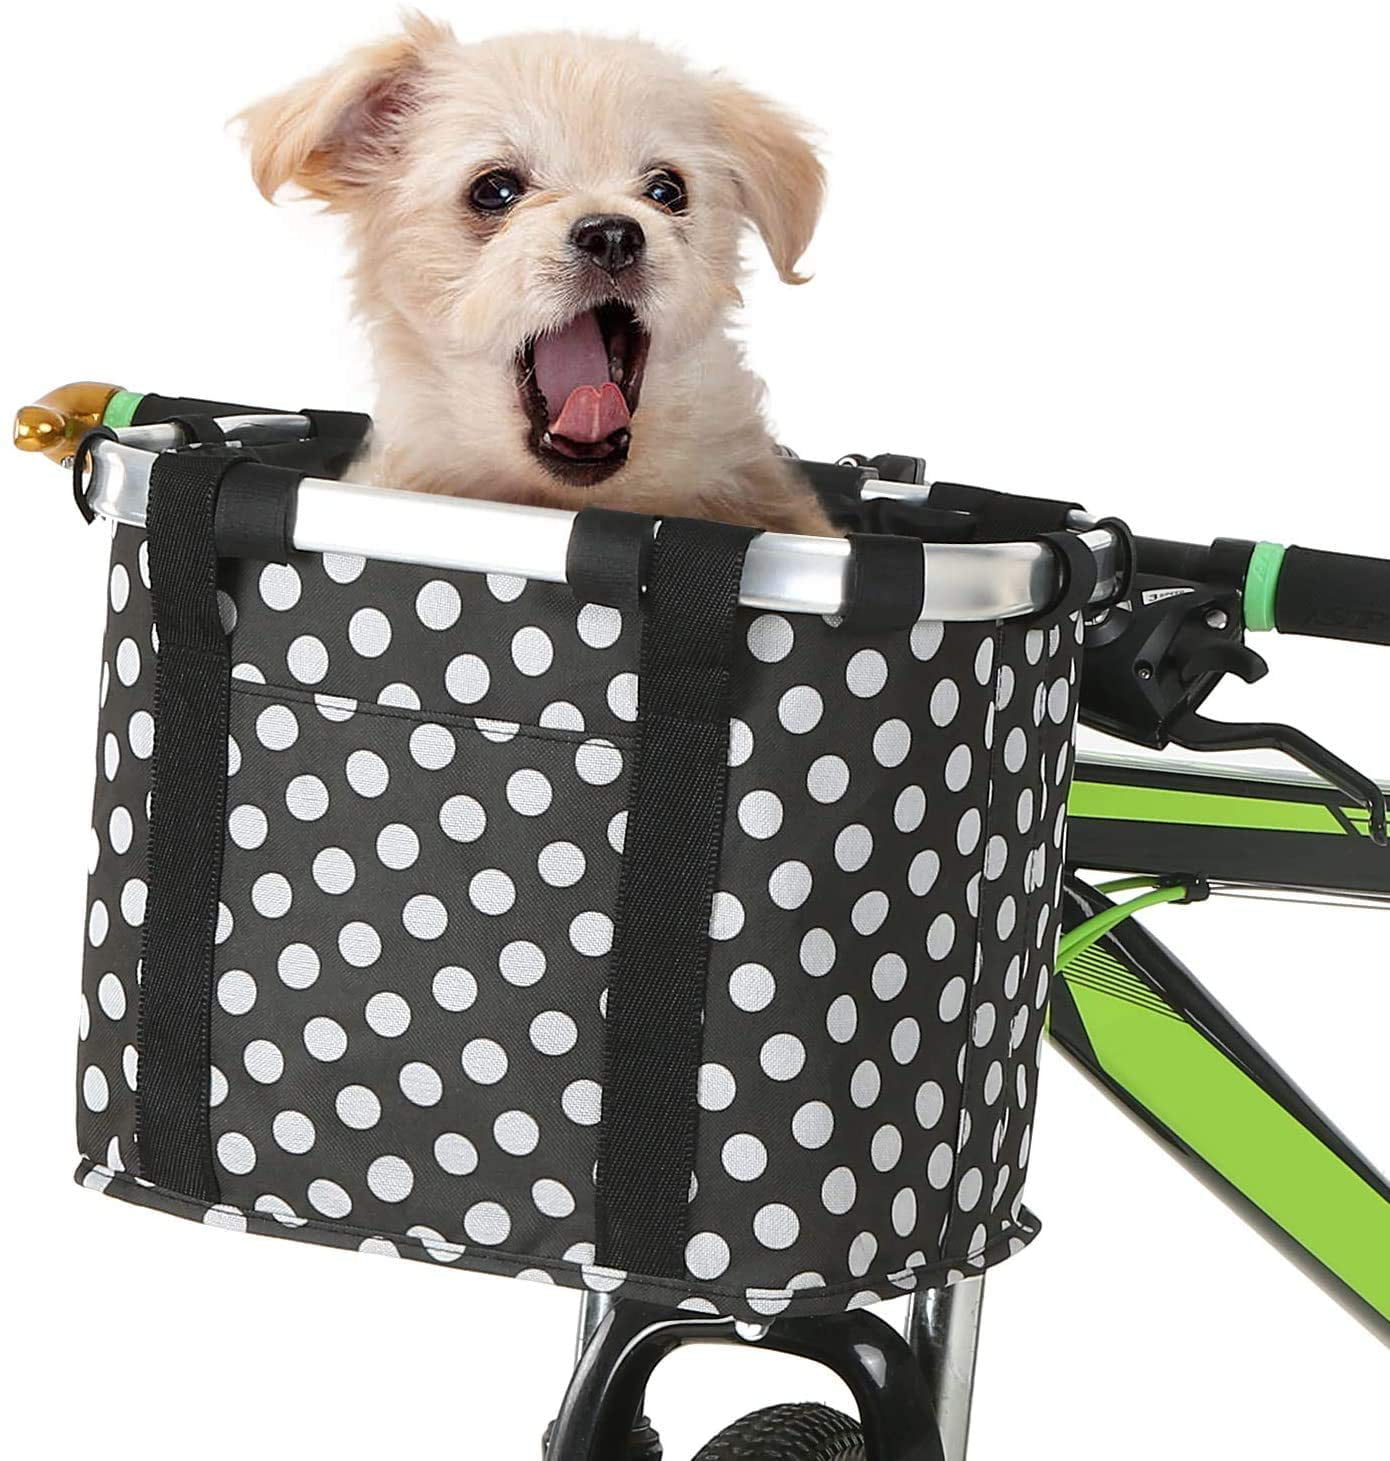 Bike Basket,Quick Release Bicycle Basket Multi Purpose Handlebar Basket for Small Pet Picnic,Easy Install and Detachable Mountain Cycling Bag Grocery 